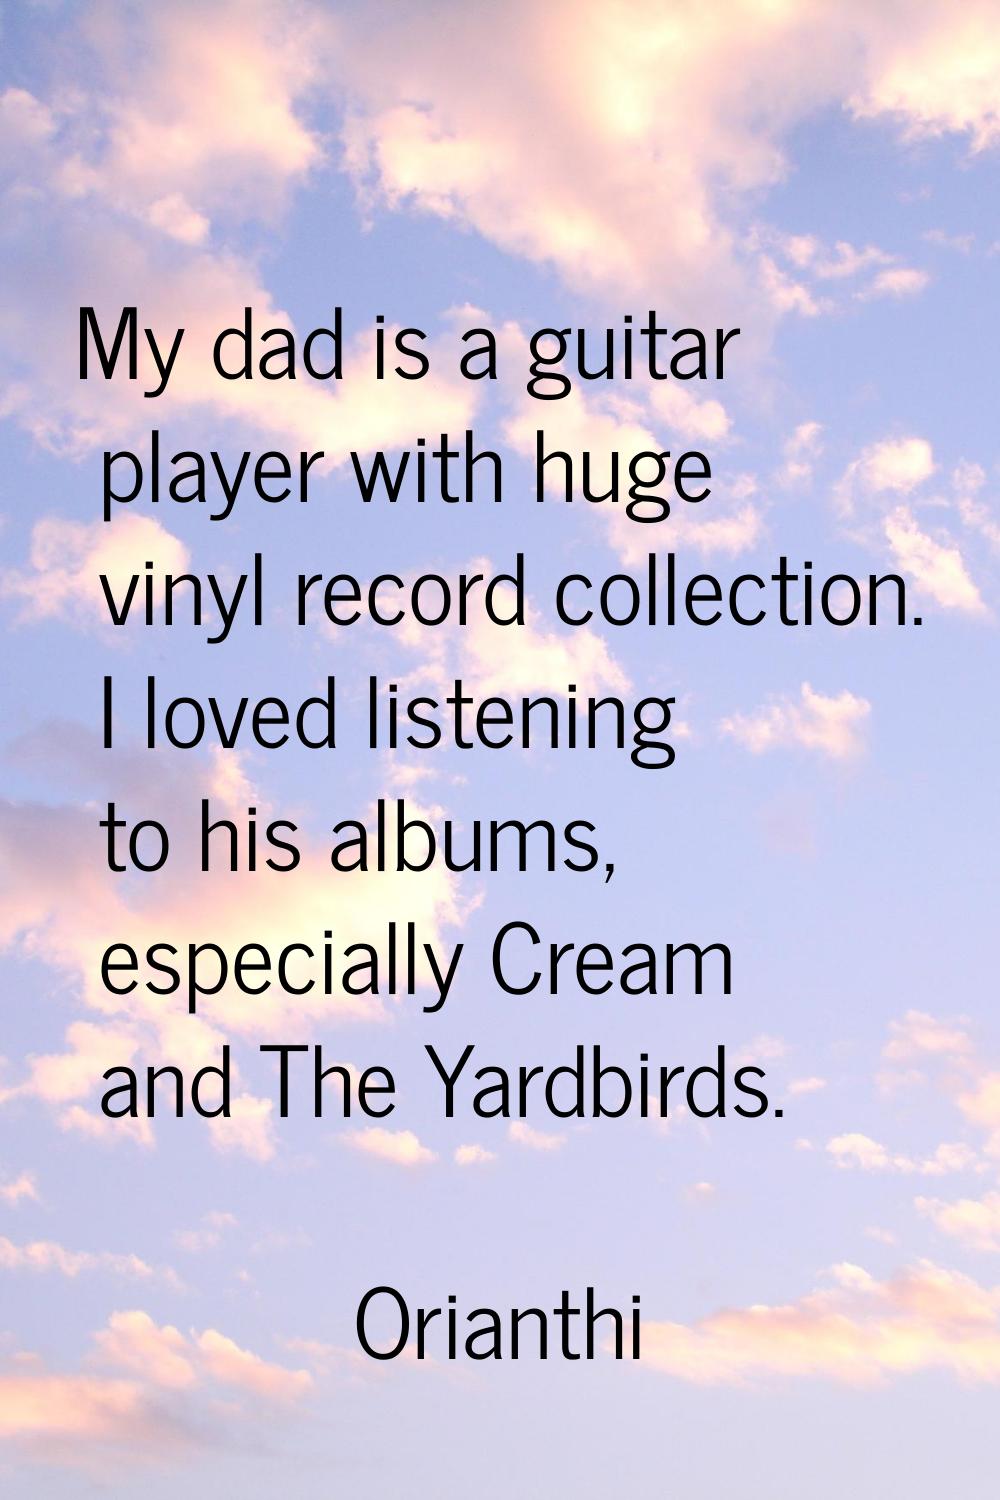 My dad is a guitar player with huge vinyl record collection. I loved listening to his albums, espec